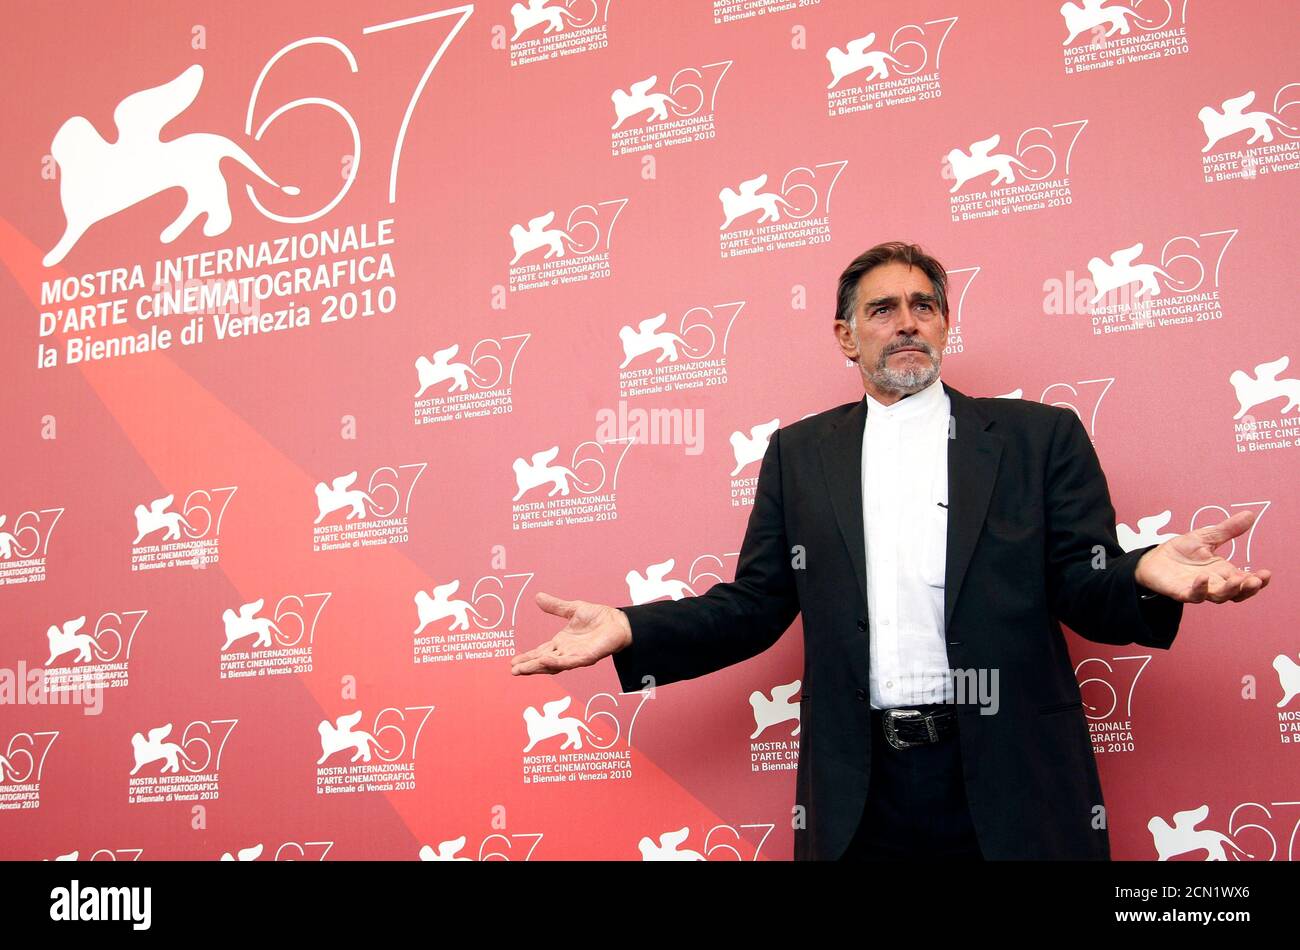 Actor Fabio Testi poses during a photocall for the movie 'Road to nowhere' at the 67th Venice Film Festival September 10, 2010. REUTERS/Tony Gentile (ITALY - Tags: ENTERTAINMENT) Stock Photo